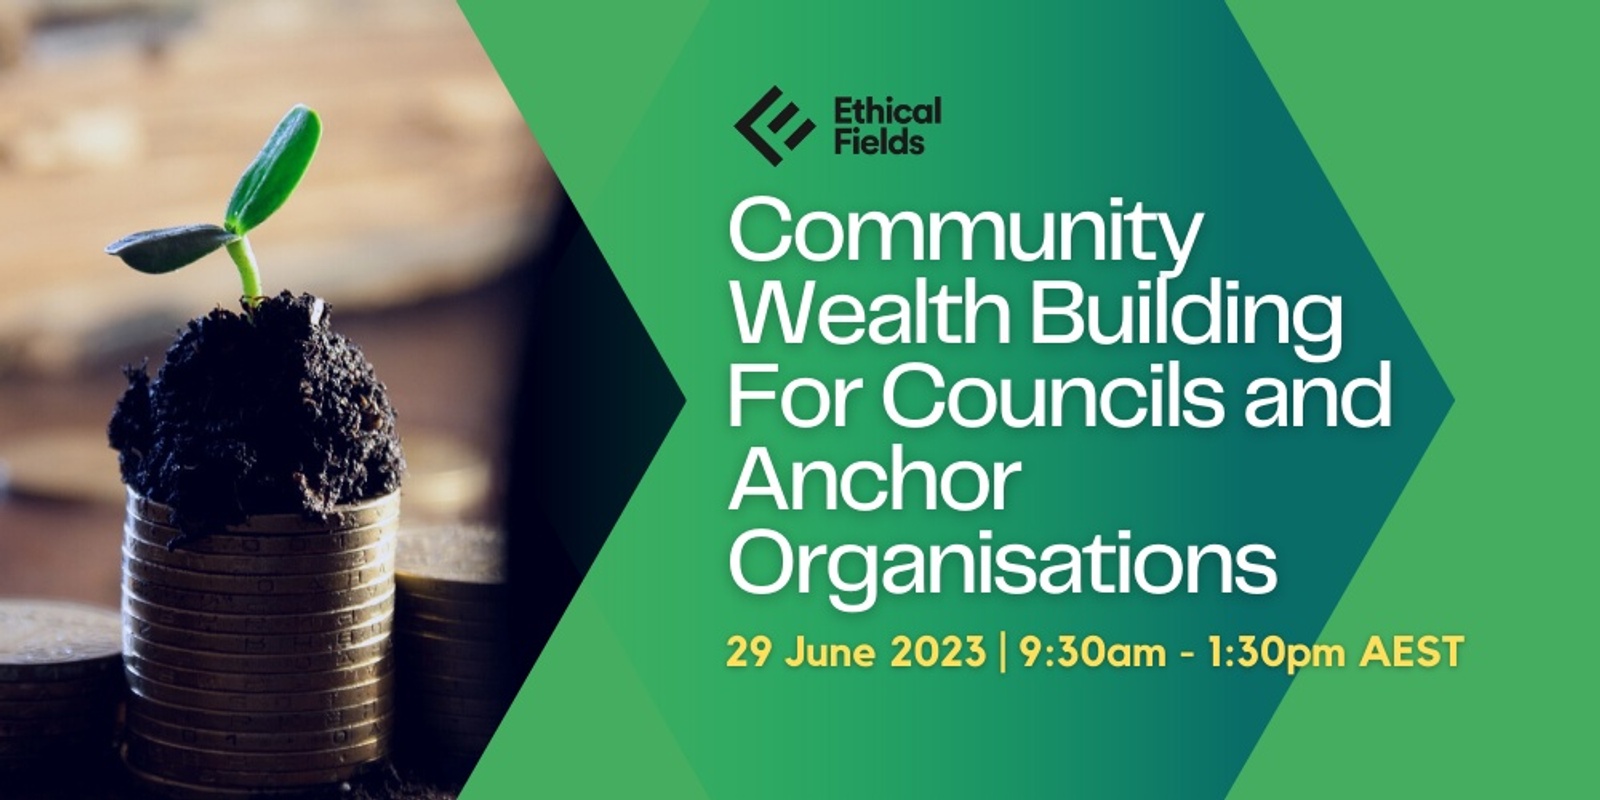 Community Wealth Building For Councils and Anchor Organisations - June 2023